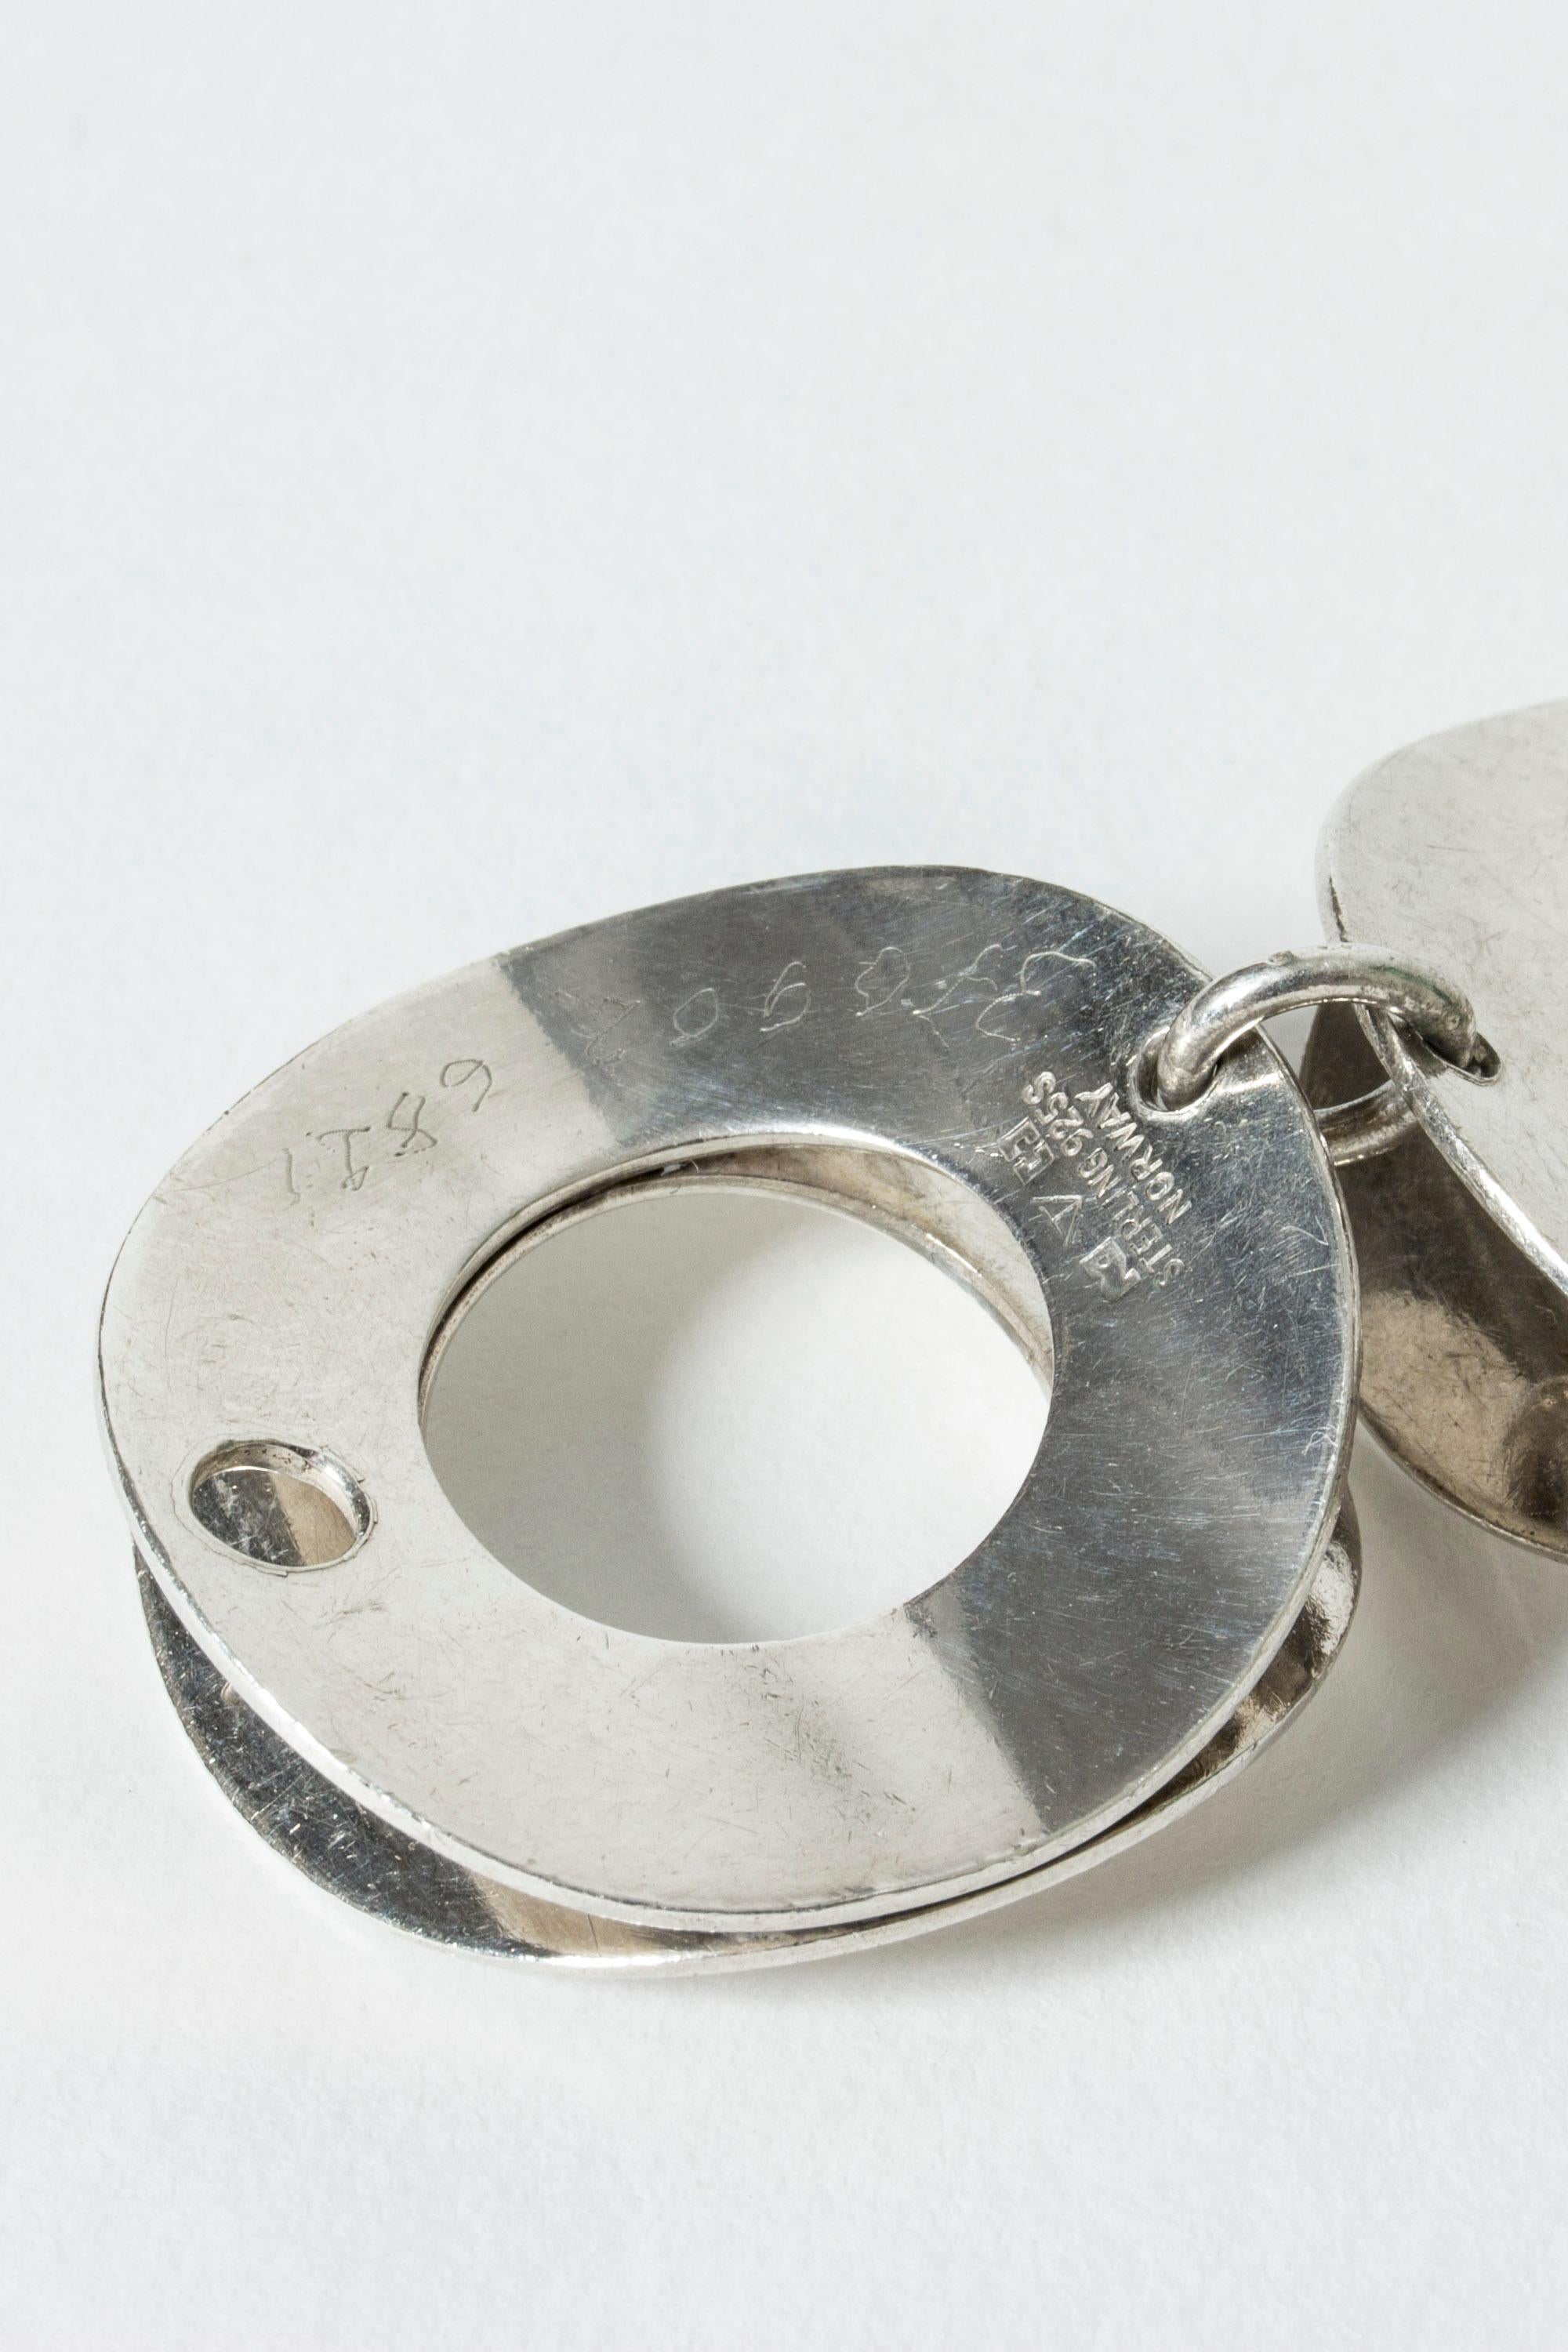 Silver Bracelet by Tone Vigeland for Plus, Norway, 1960s 1